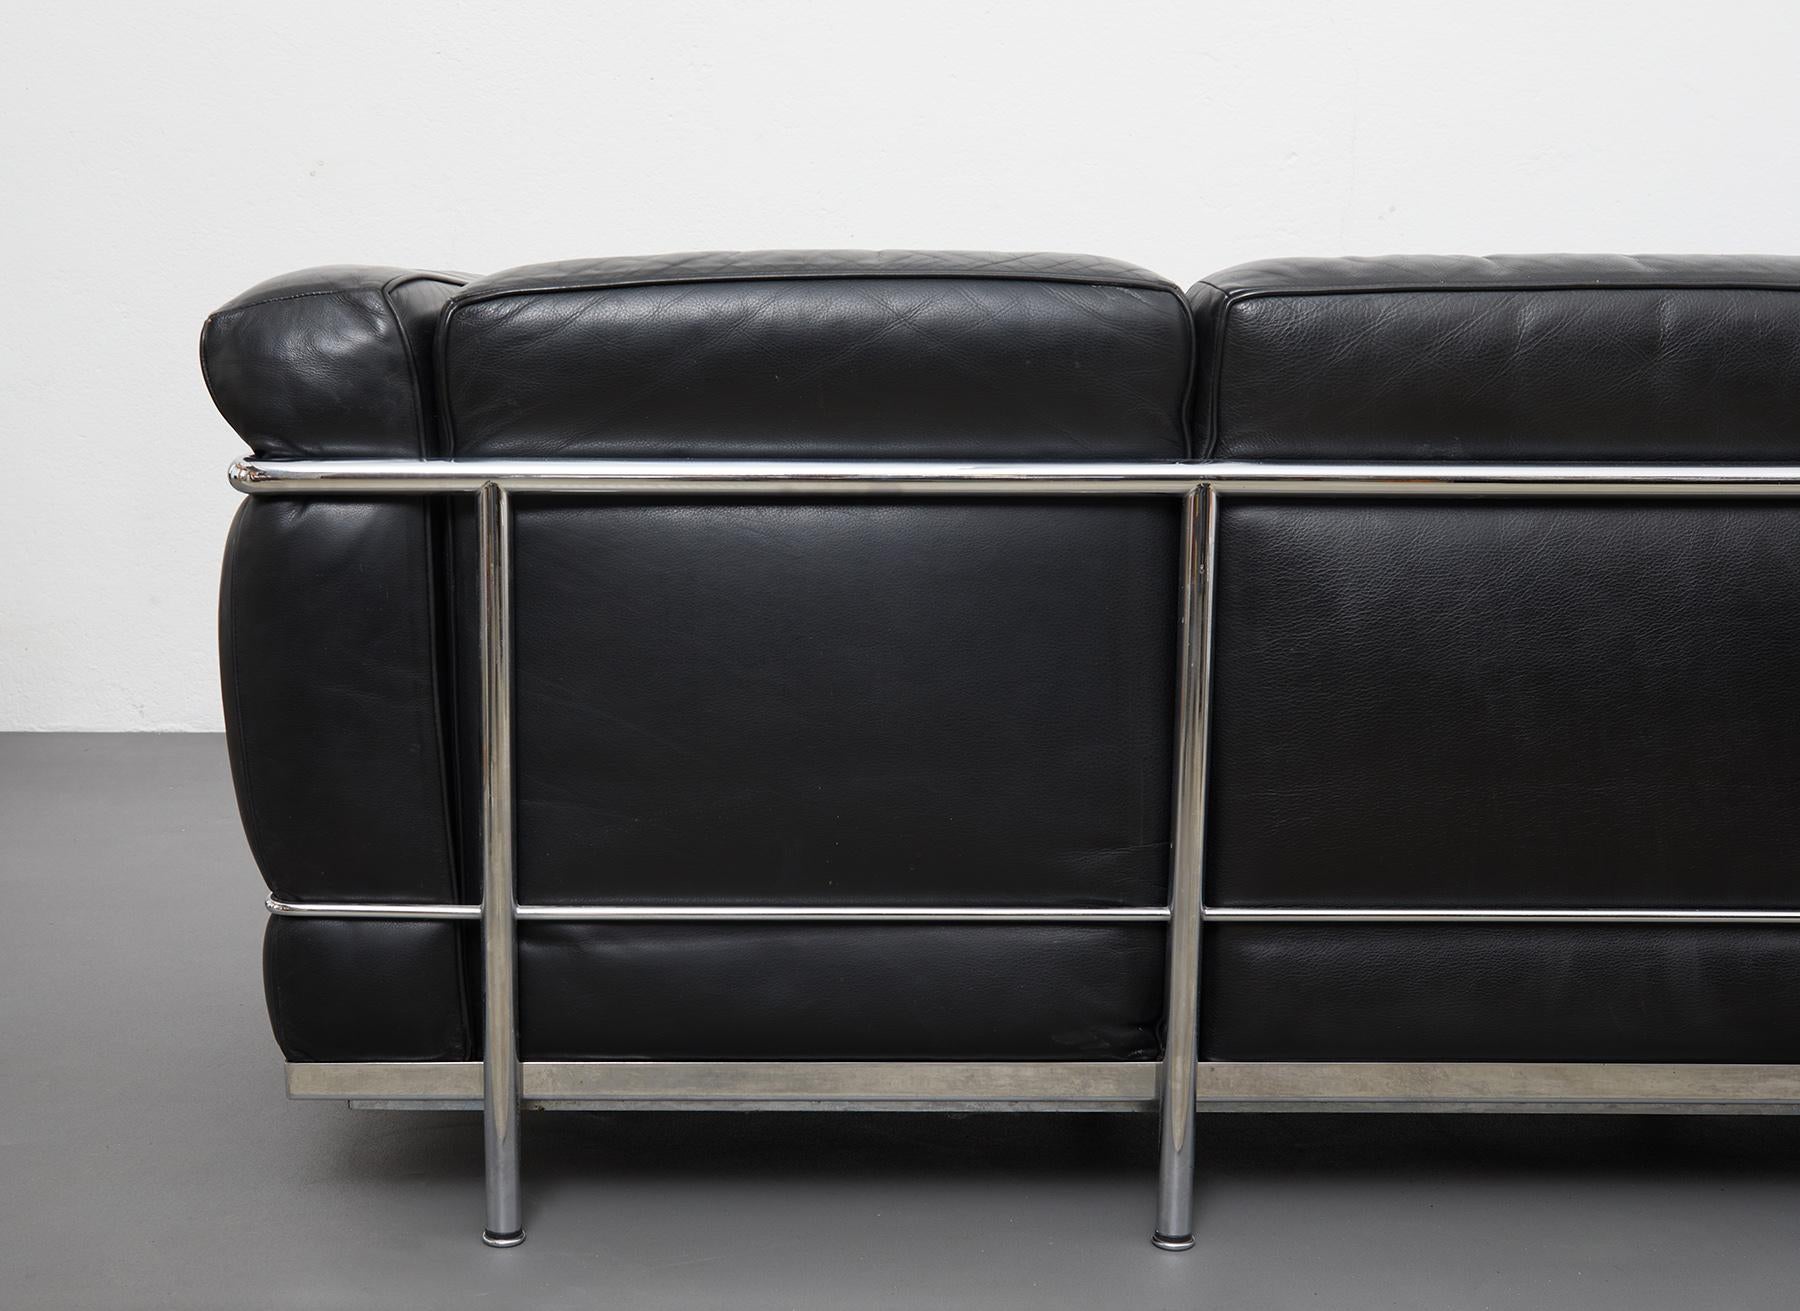 Early 20th Century Black Leather Three Seater Sofa LC2 by Le Corbusier for Cassina, c.1980